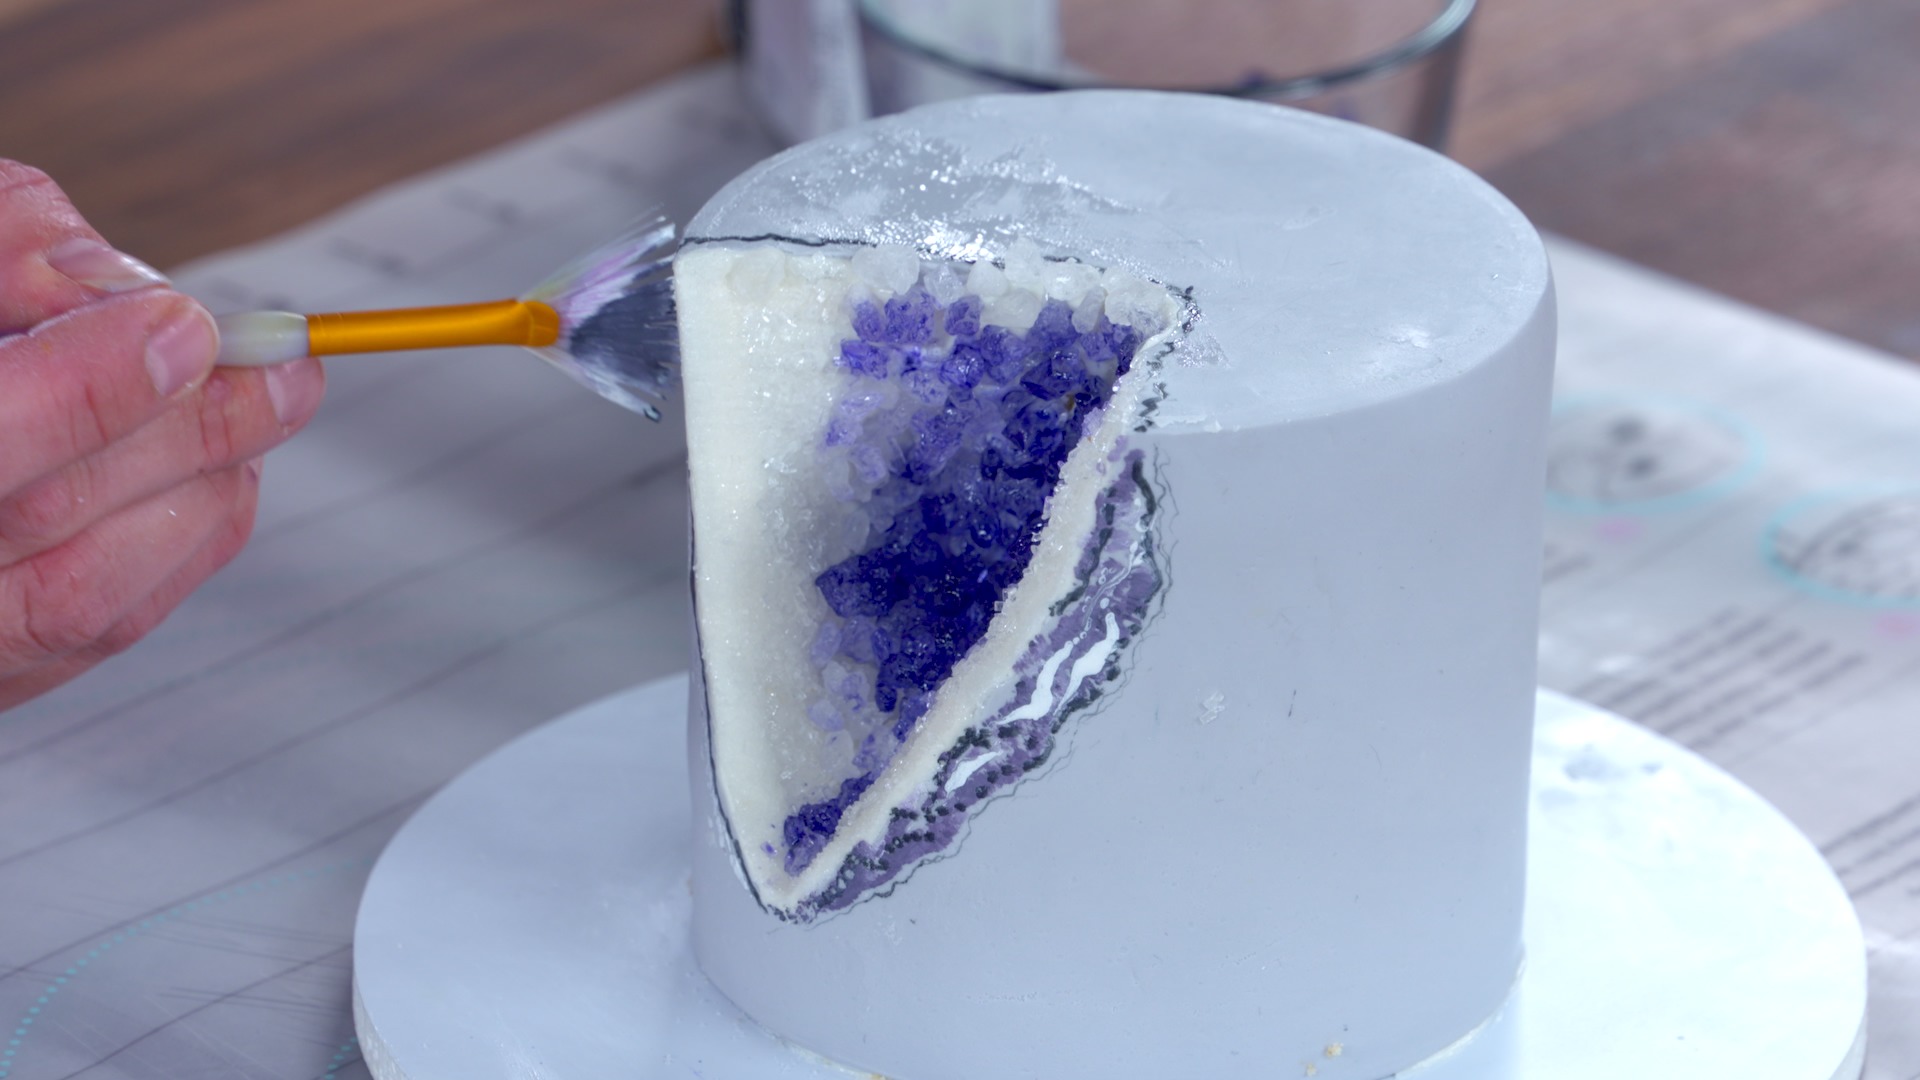 Wedding cakes that rock! Geode cakes are trendy and gorgeous